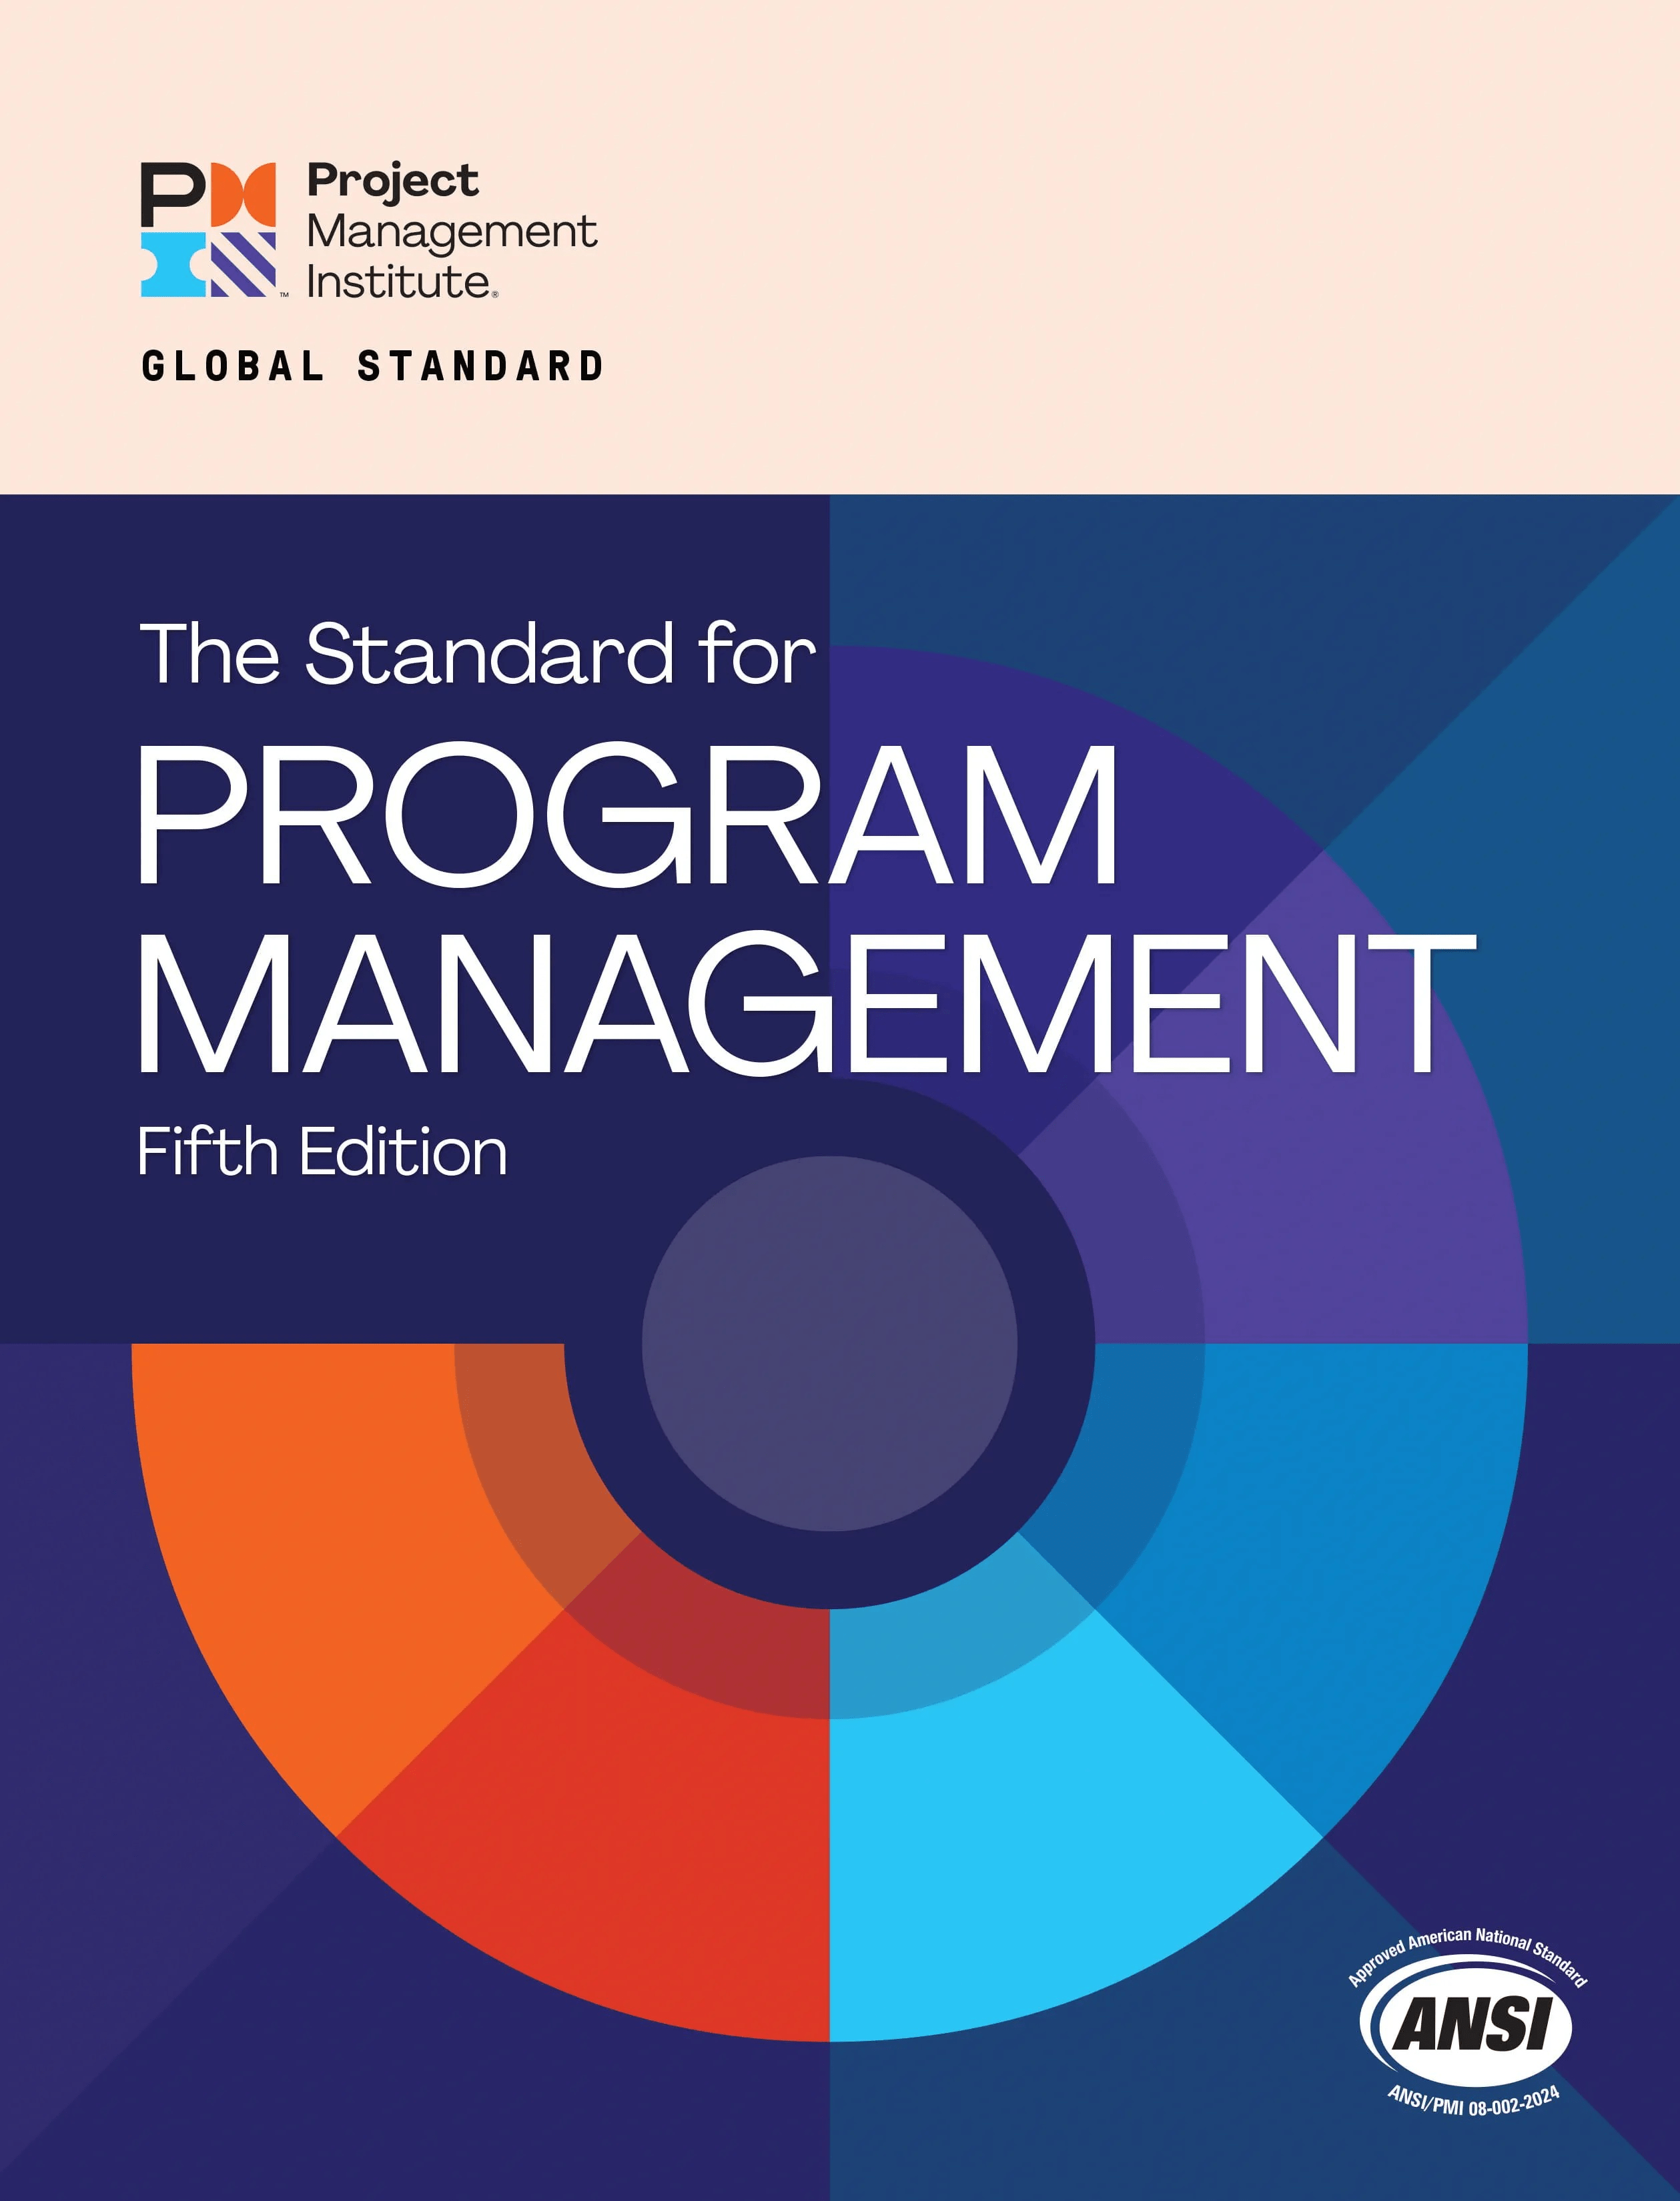 The Standard for Program Management – Fifth Edition